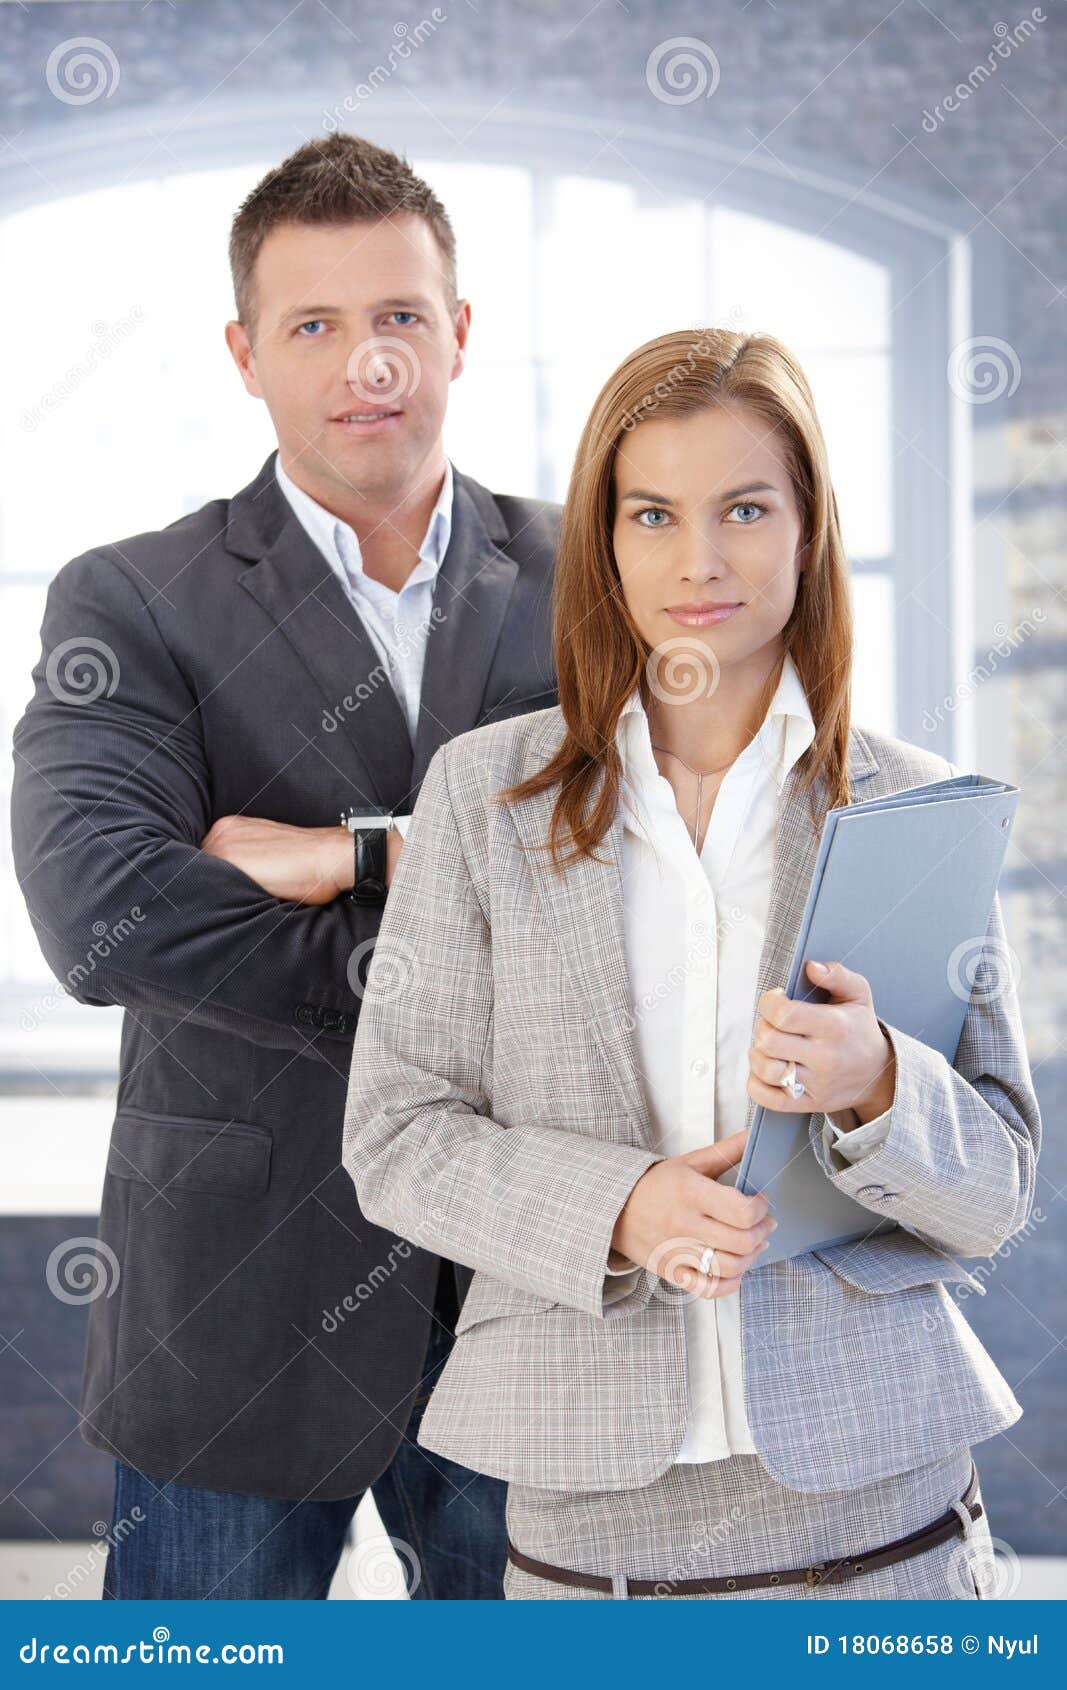 young businesspeople standing in office